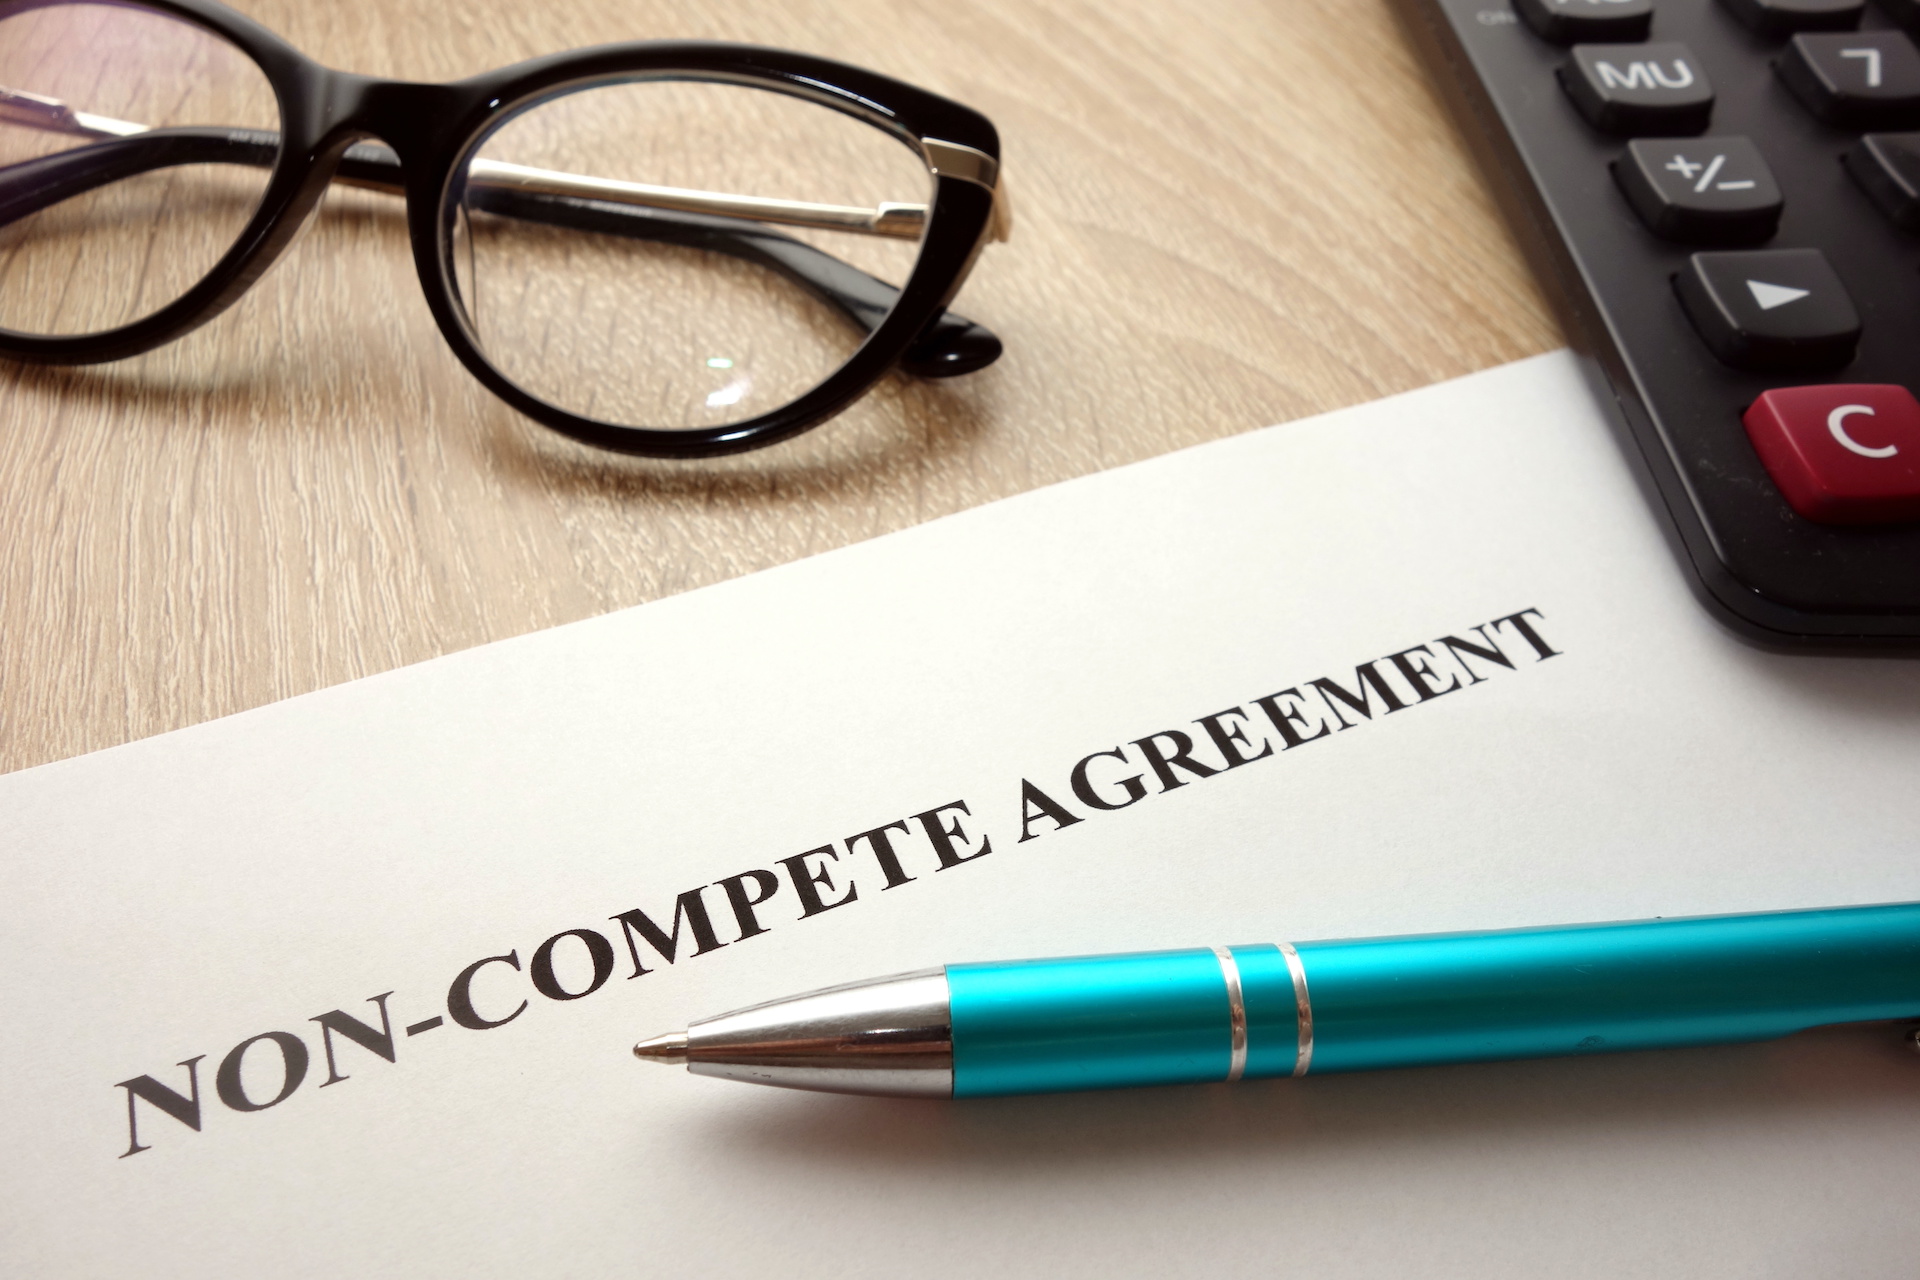 Image of non-compete agreement